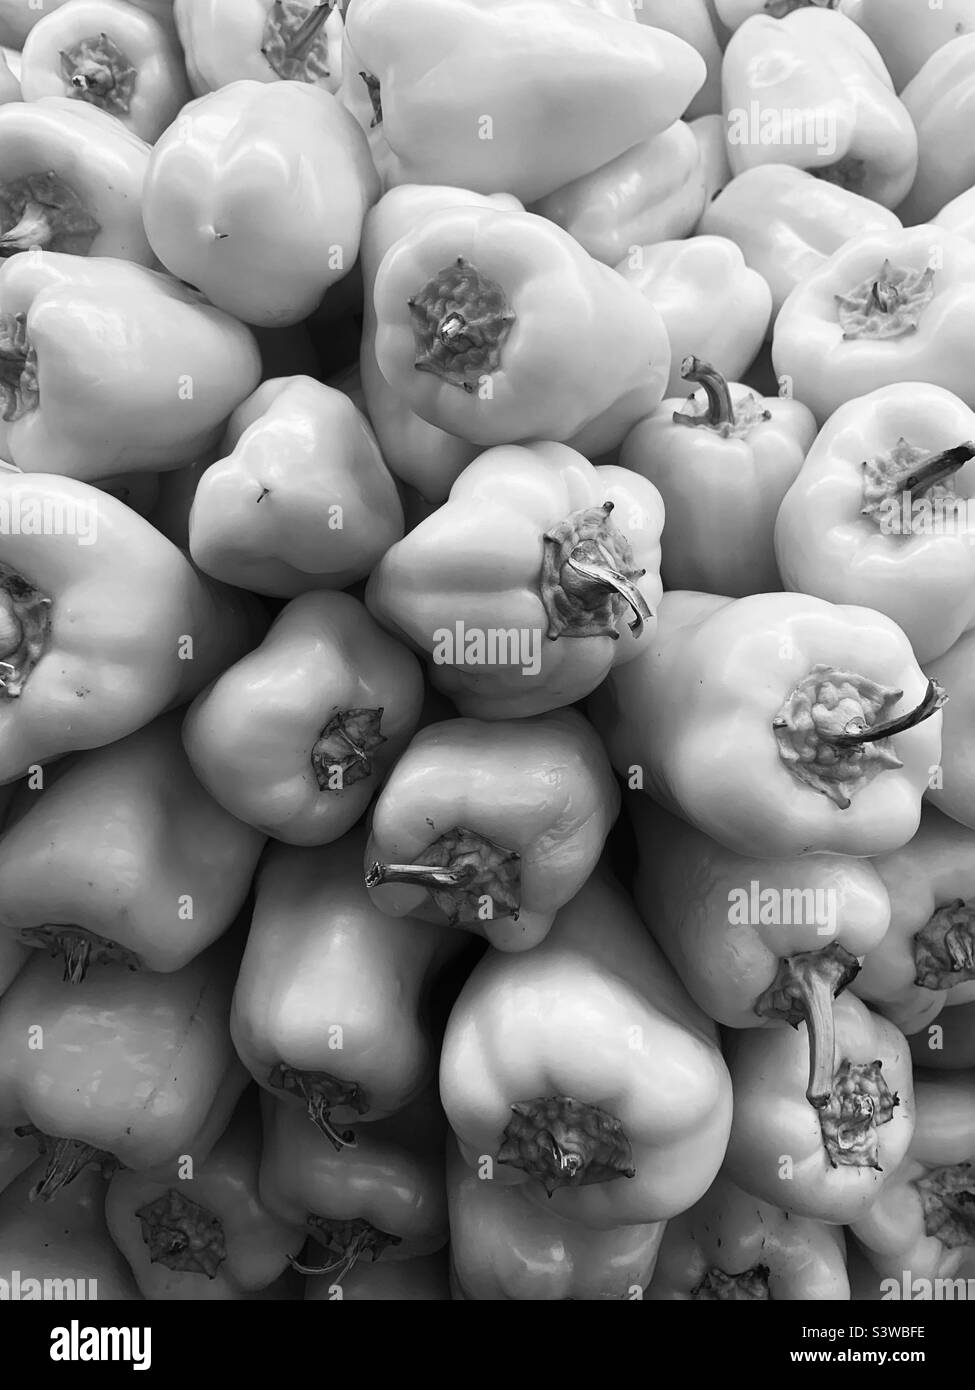 Pile of fresh bell peppers in black and white. Stock Photo